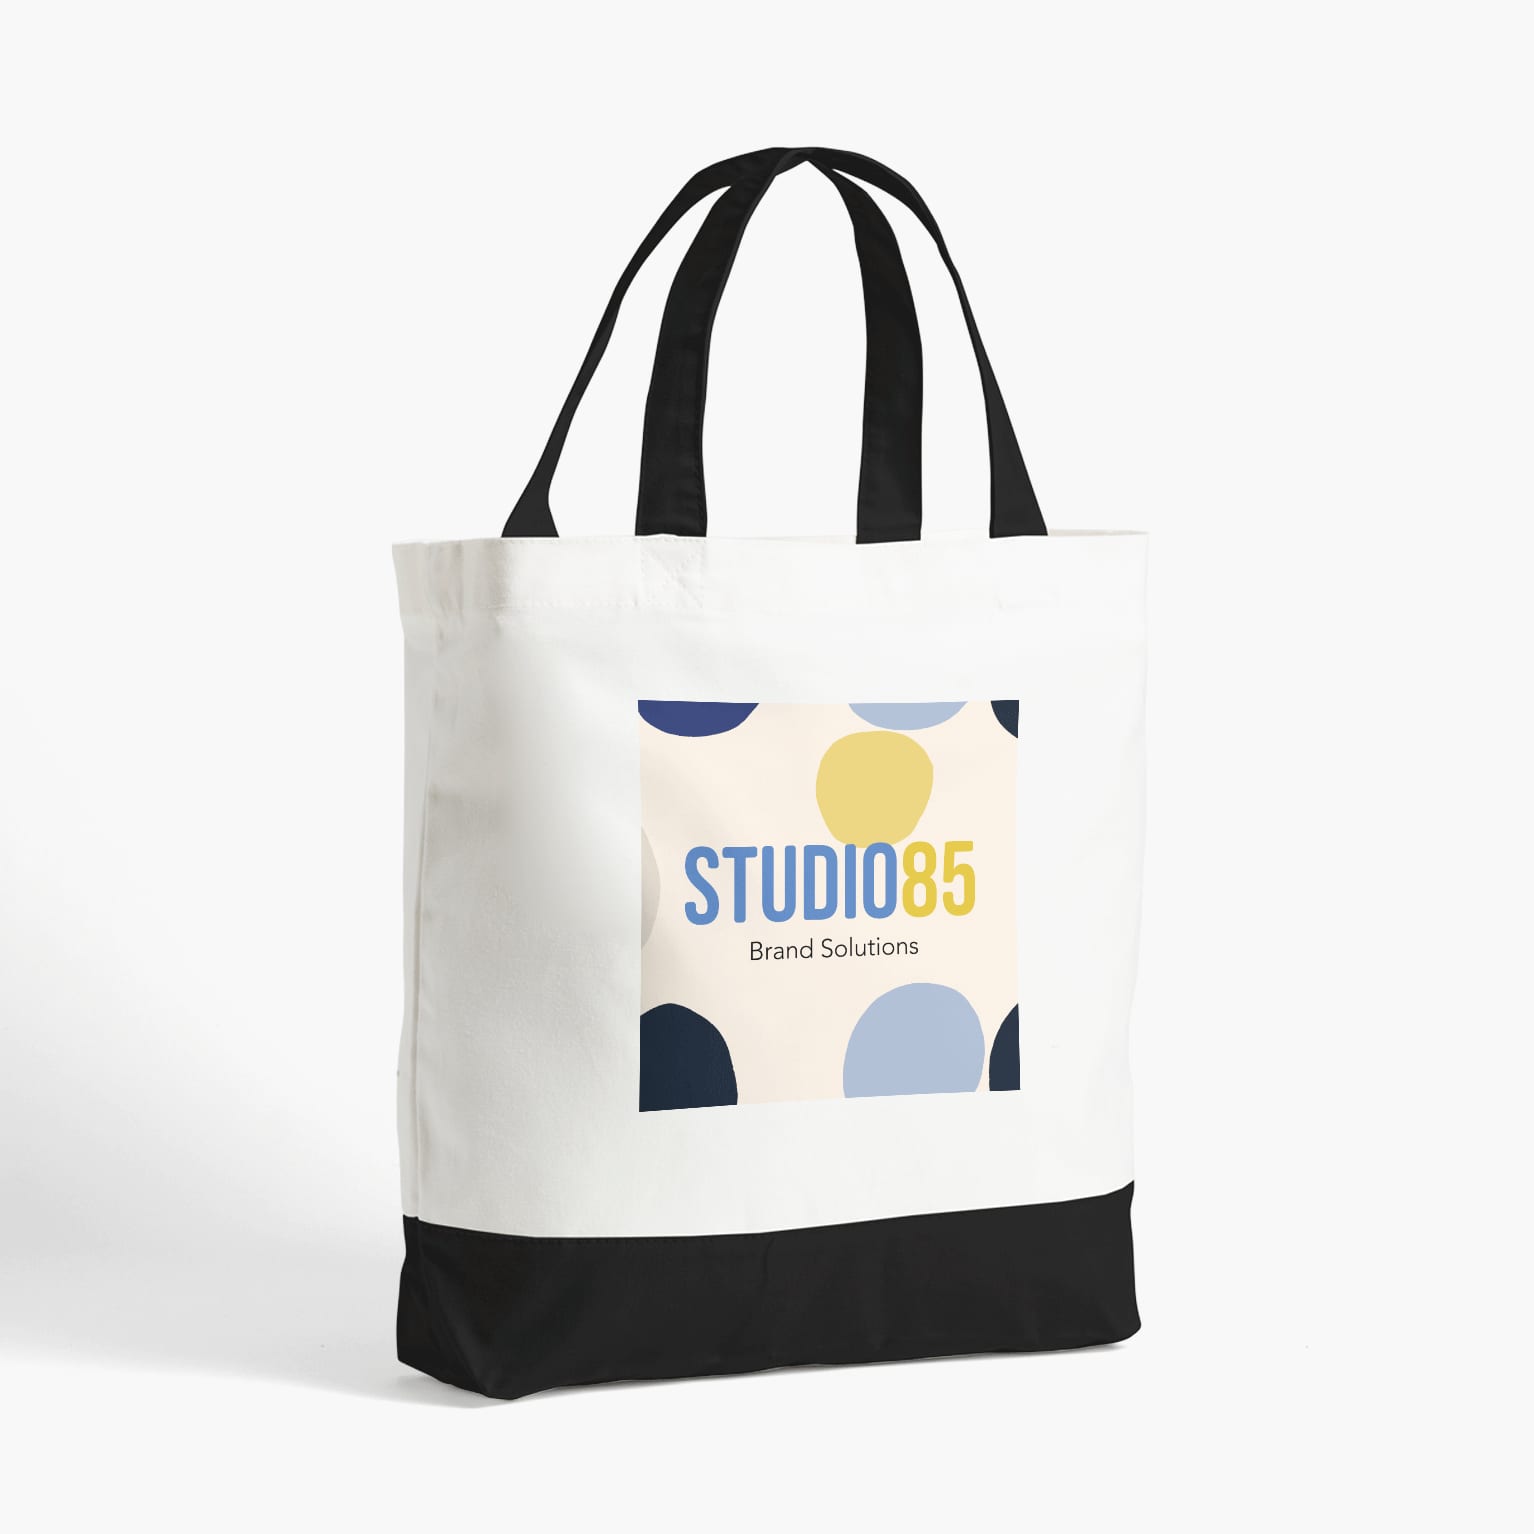 Custom branded tote bags: Our top tips to make your bags pop!